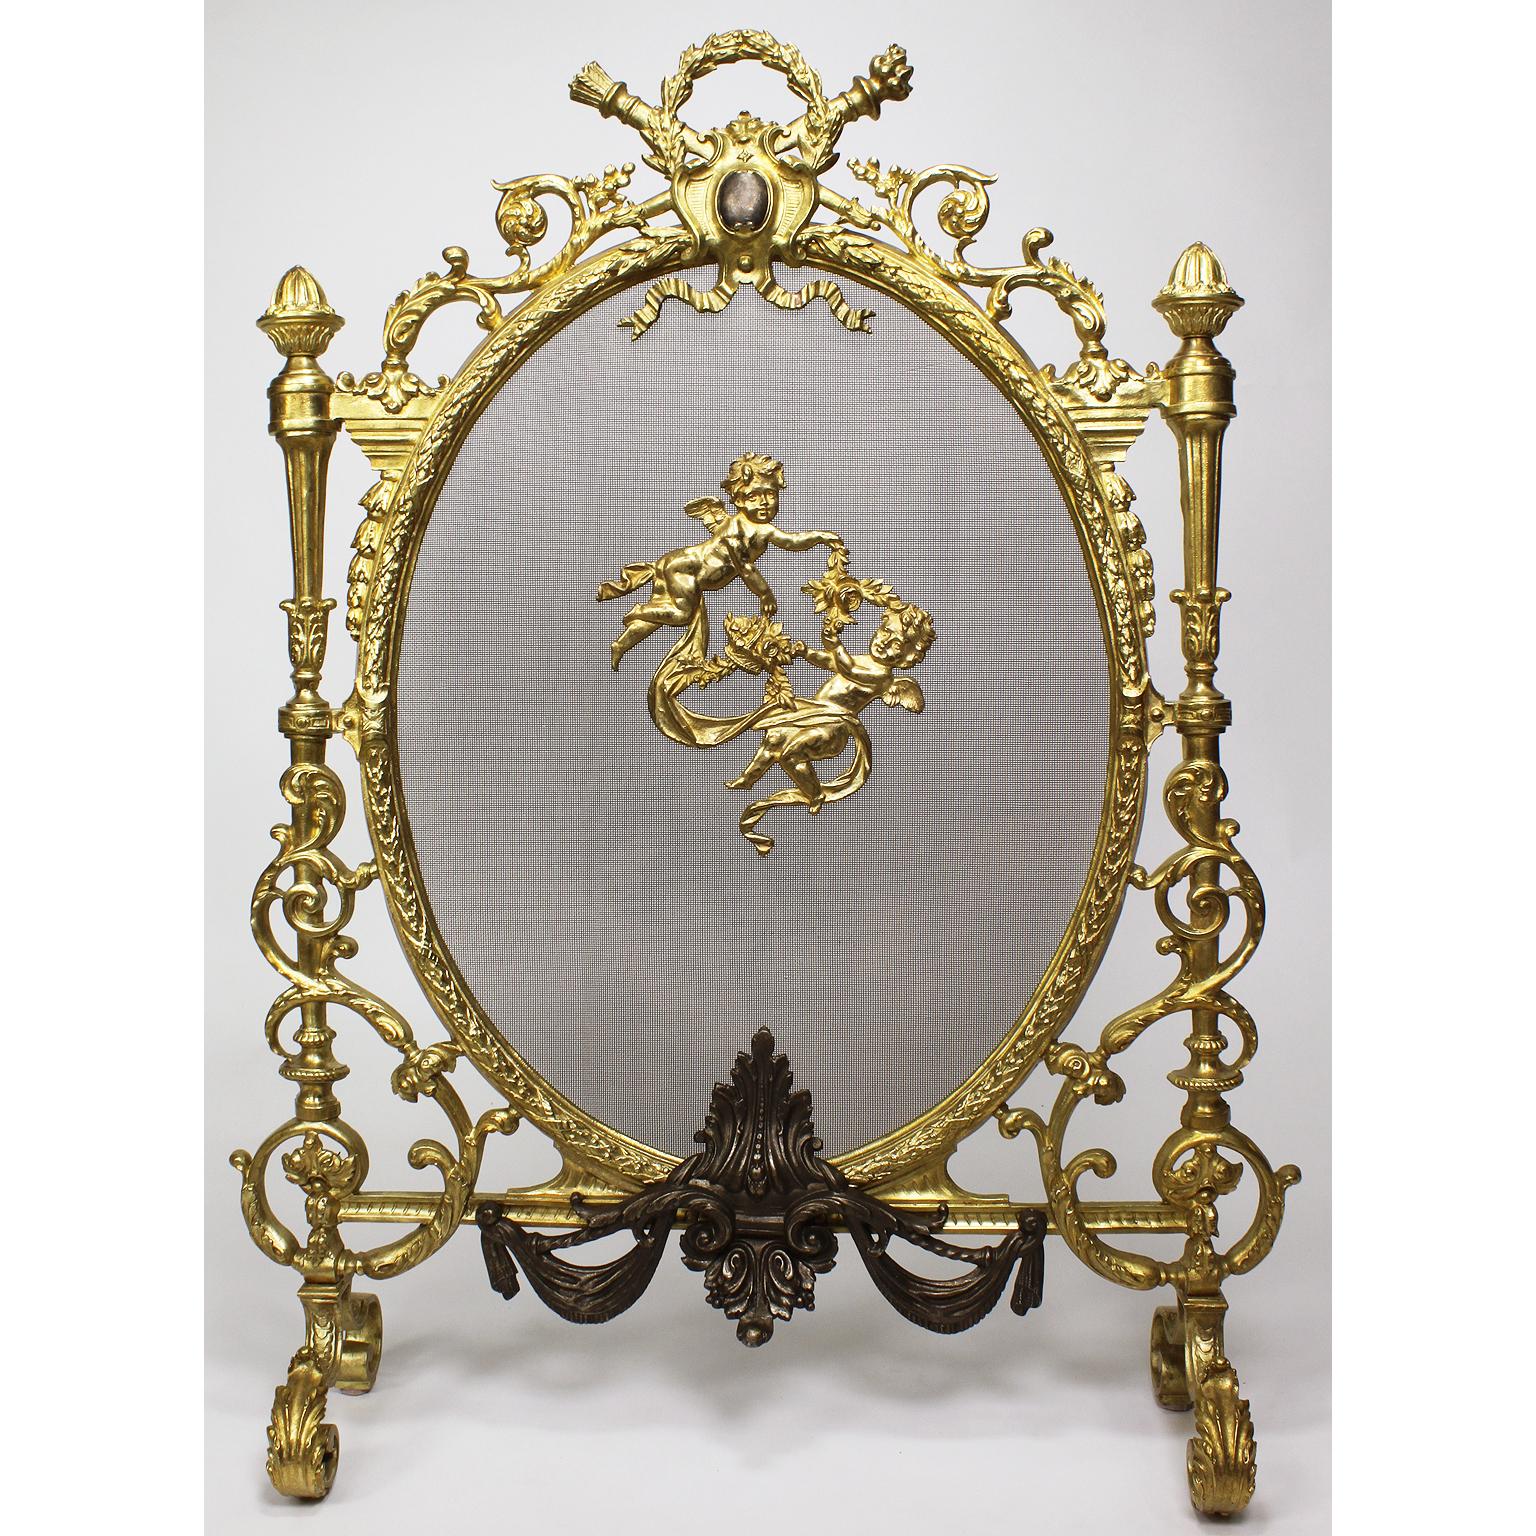 A French 19th-20th century 'Belle Époque' Louis XV style gilt and patinated bronze fireplace screen. The ornately decorated oval screen, supported with a pair a of finial columns, surmounted with floral acanthus, leaves, ribbons and draped swags.